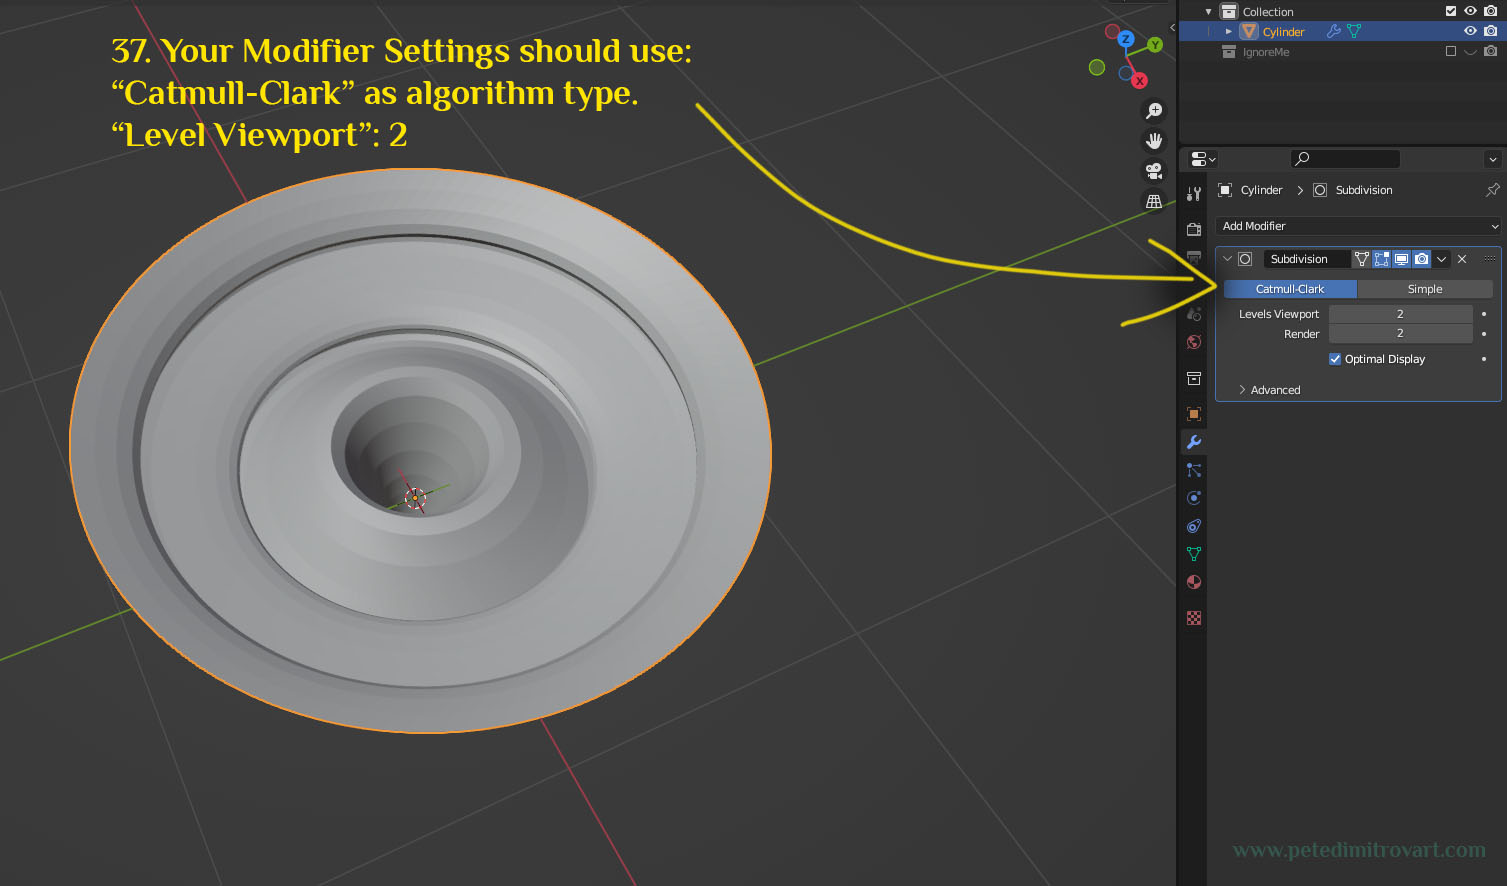 Screenshot similar to before but now showing the Subdivision Modifier settings. The settings needed are described in the sentence above and its what the yellow text on the image reads.